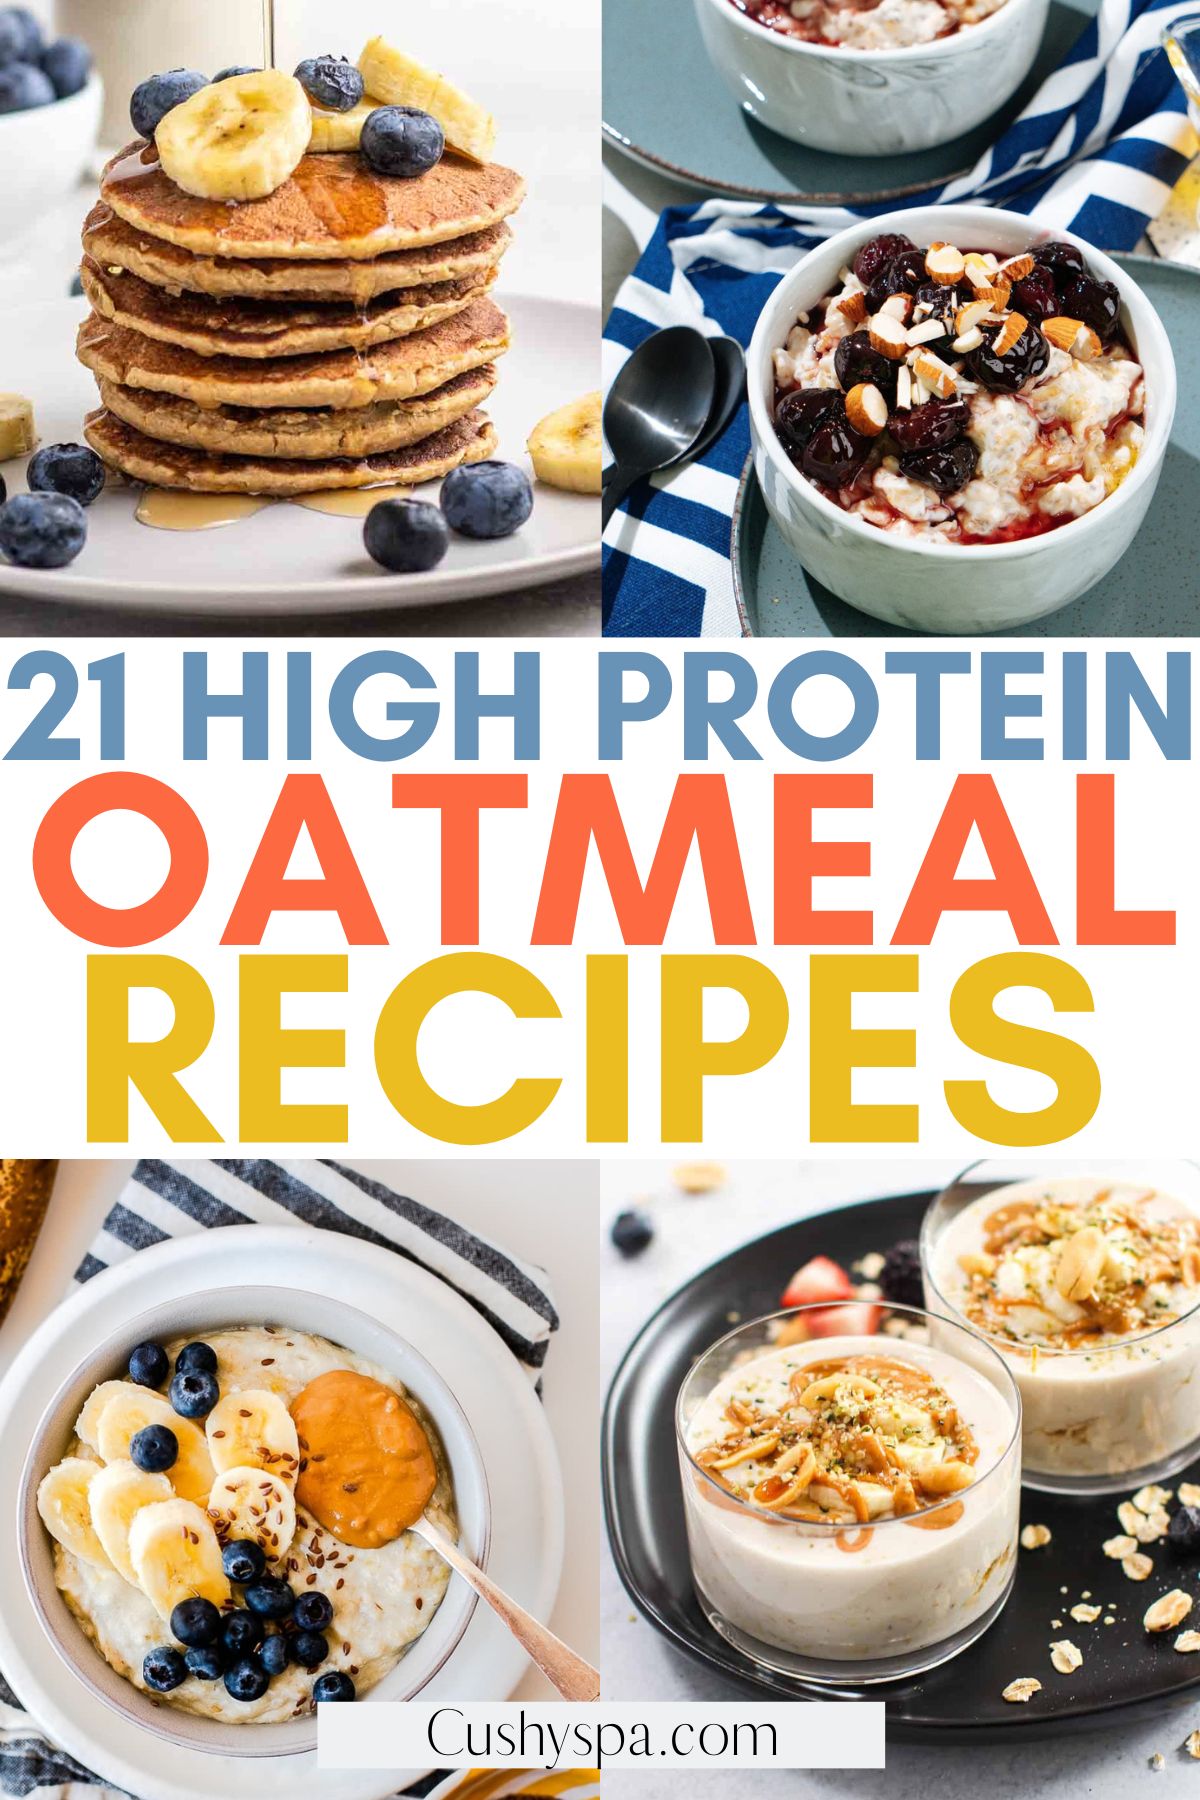 High Protein Oatmeal Recipes